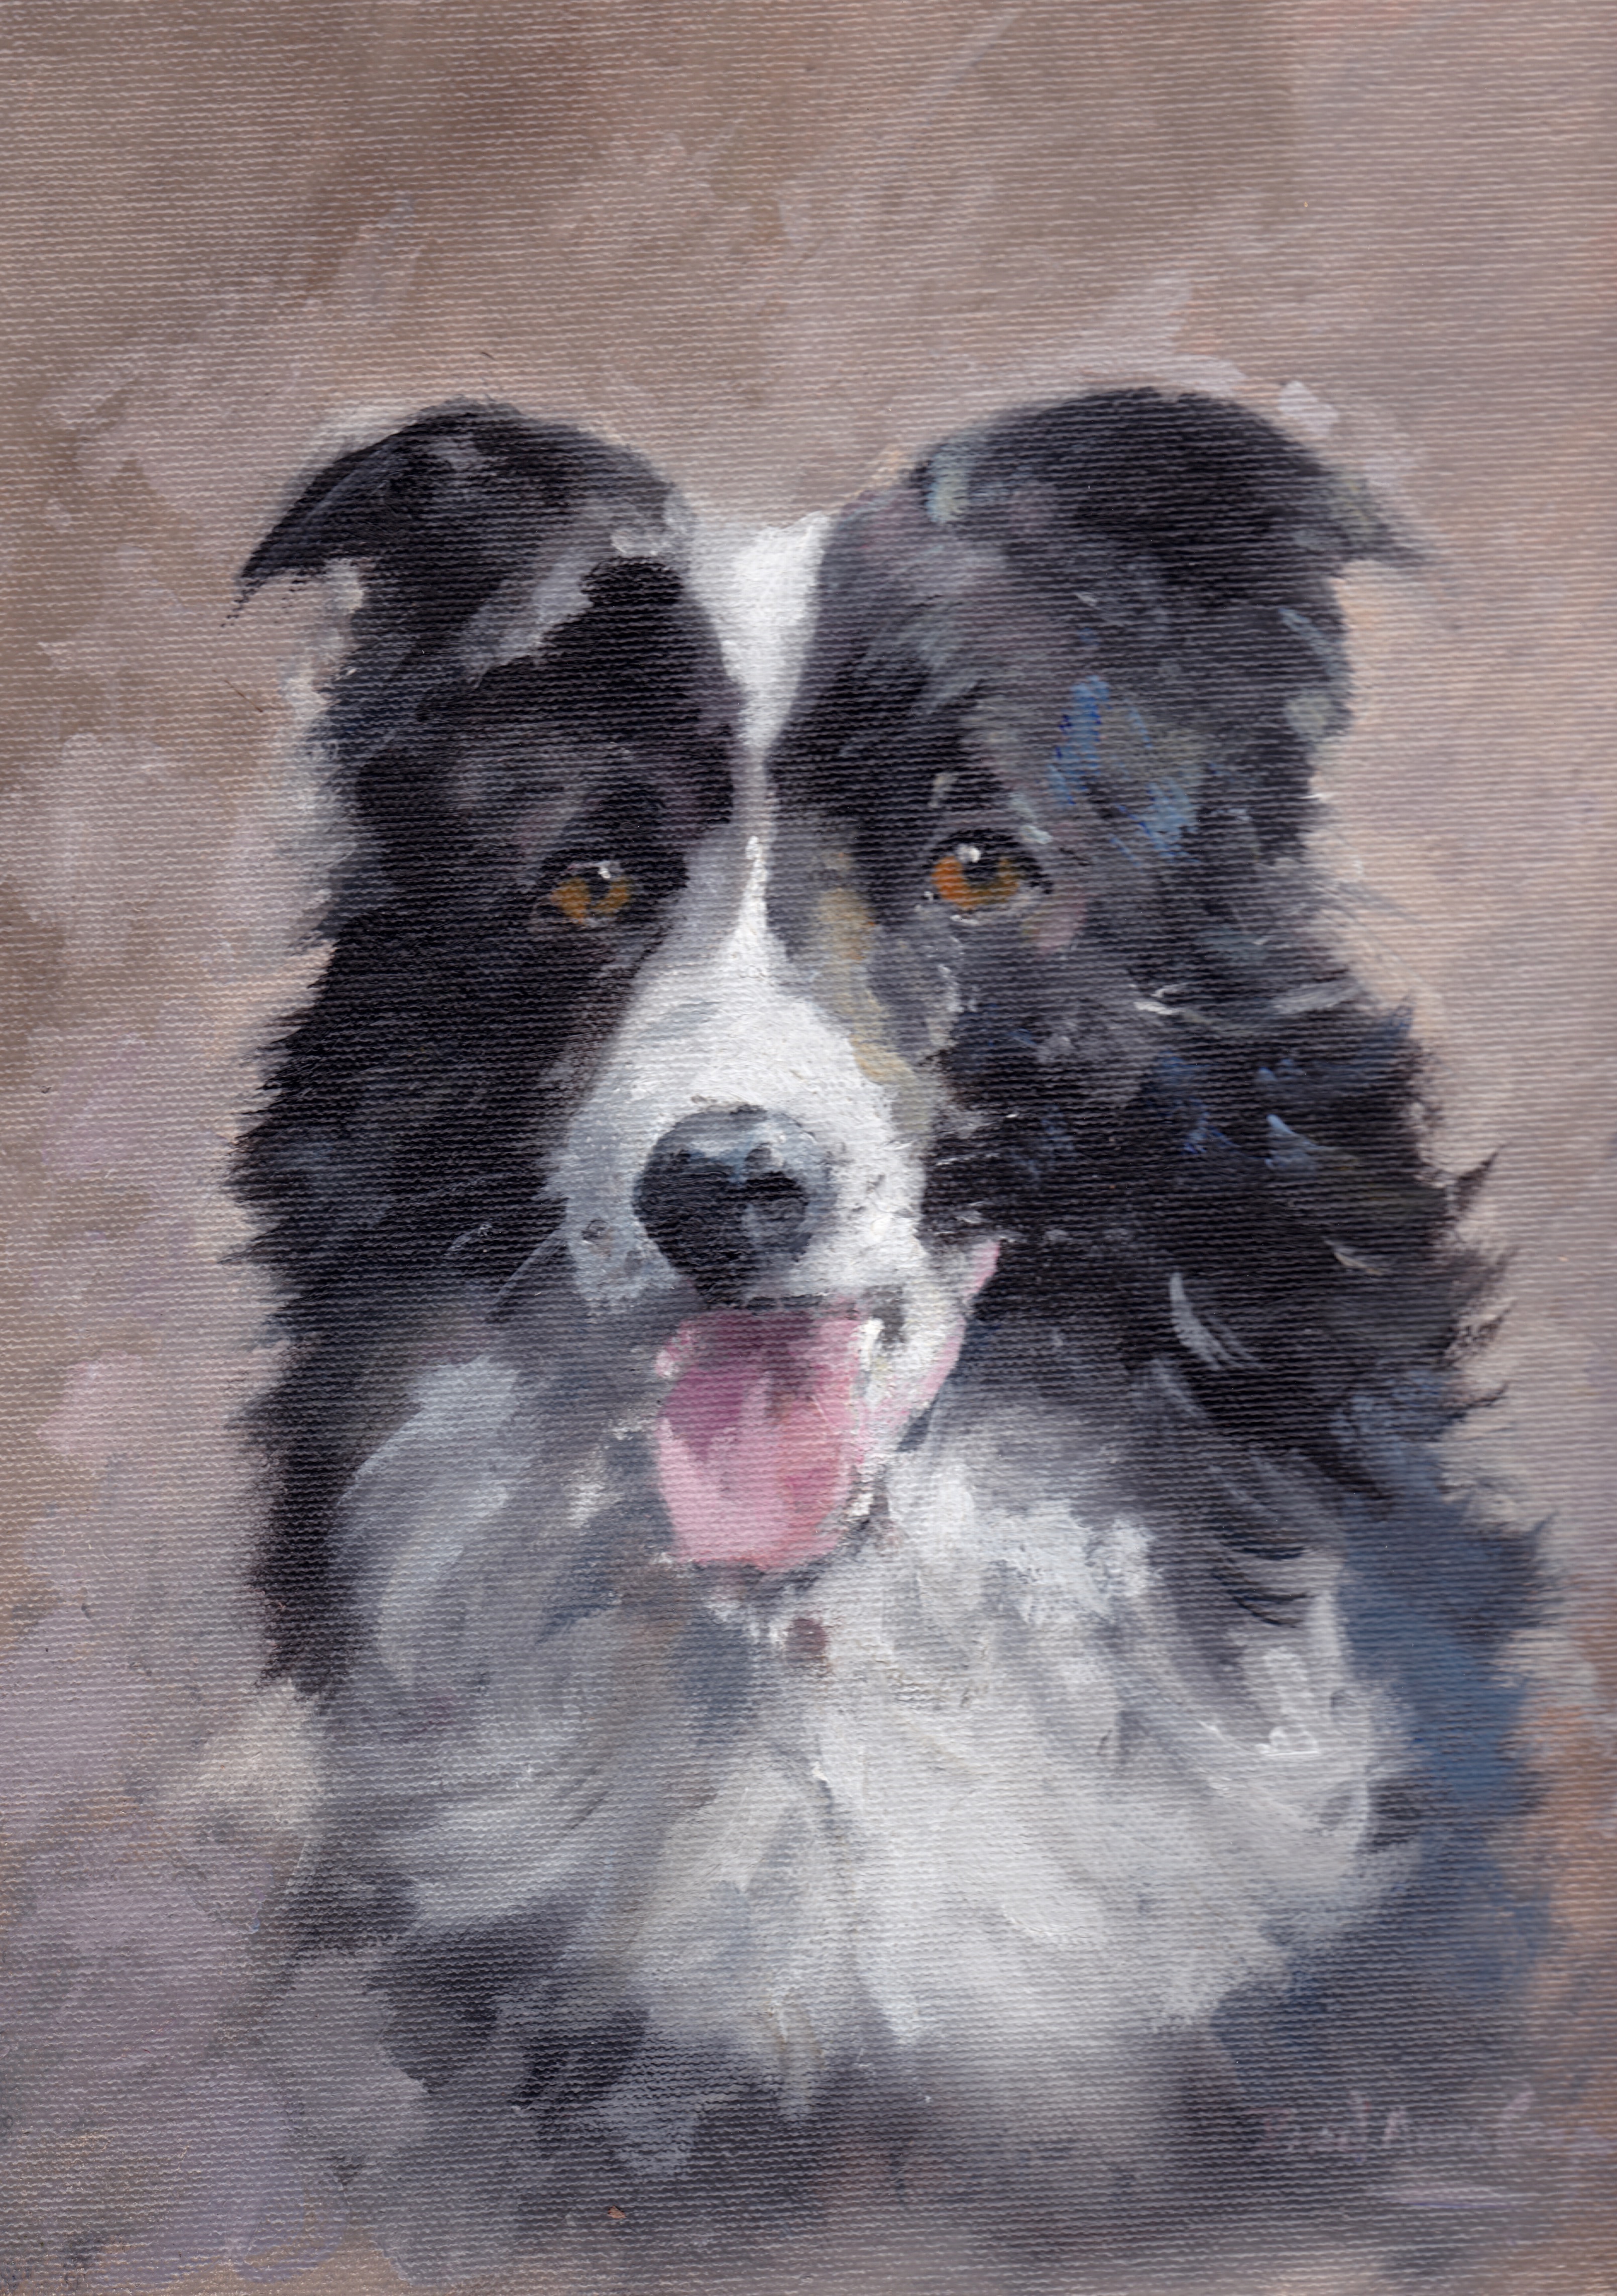 "Border Collie" by David 'Mouse' Cooper.